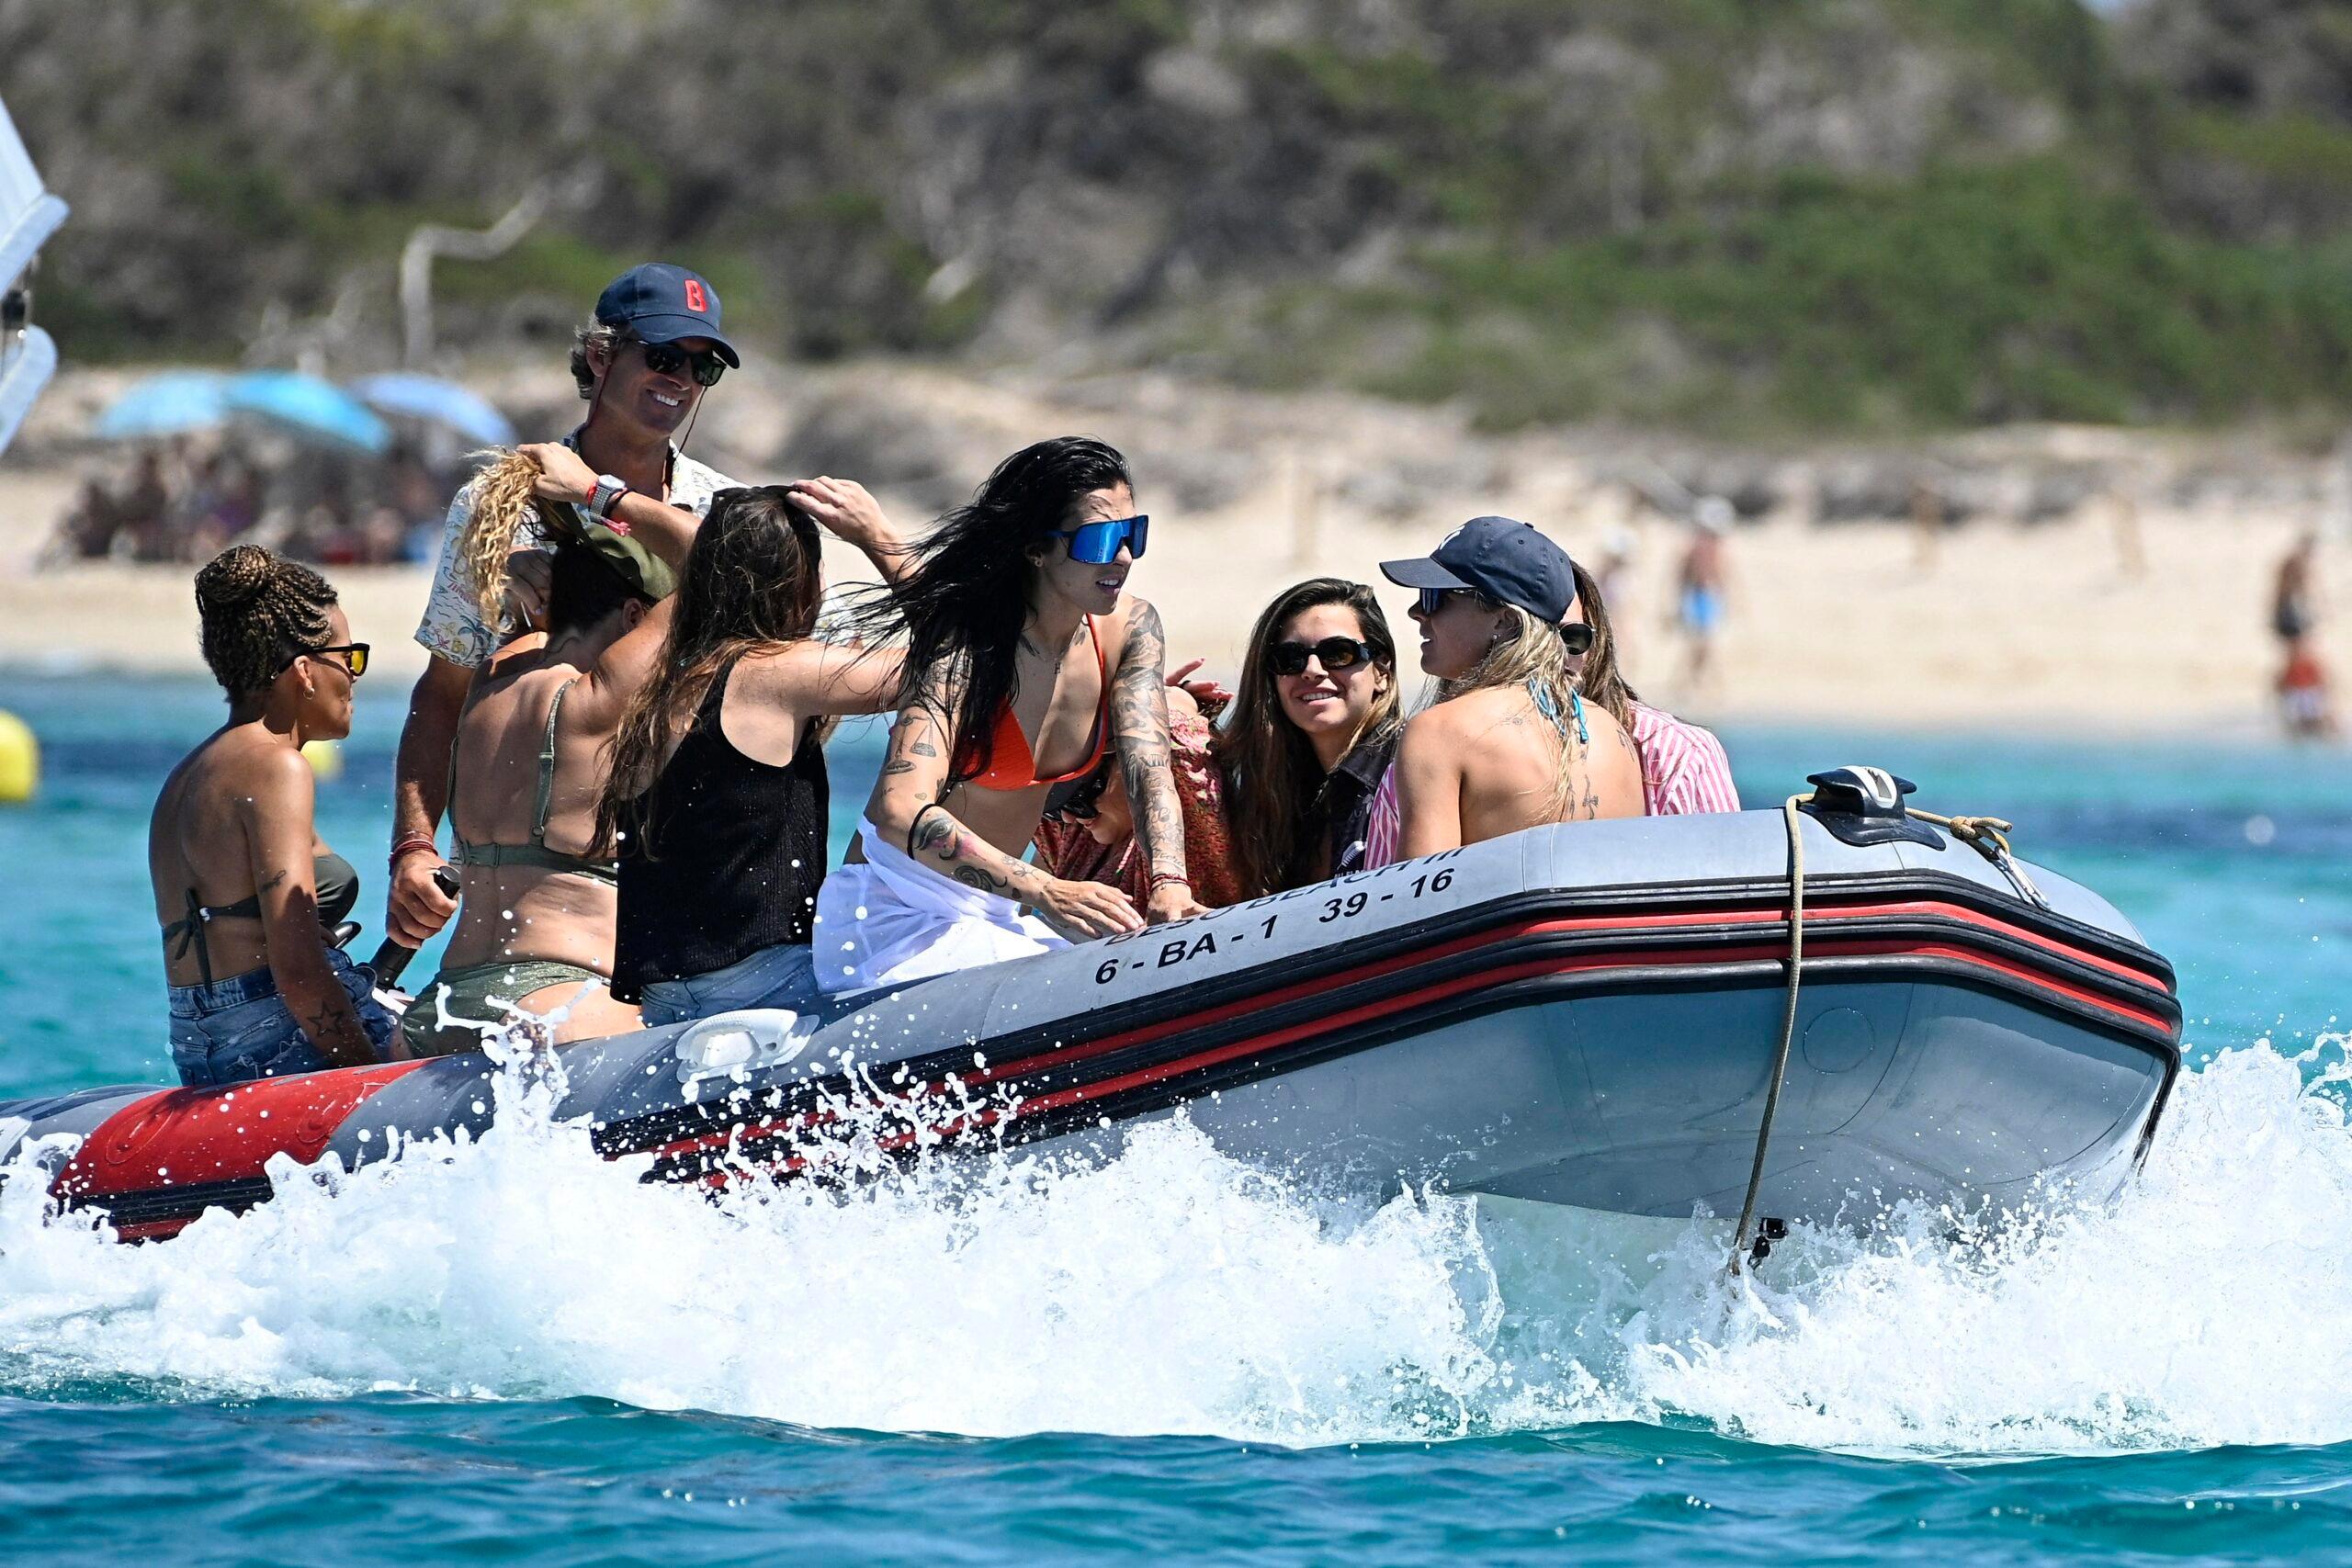 Spanish Women's Soccer Team Lay Out On A Boat After Their Big Win